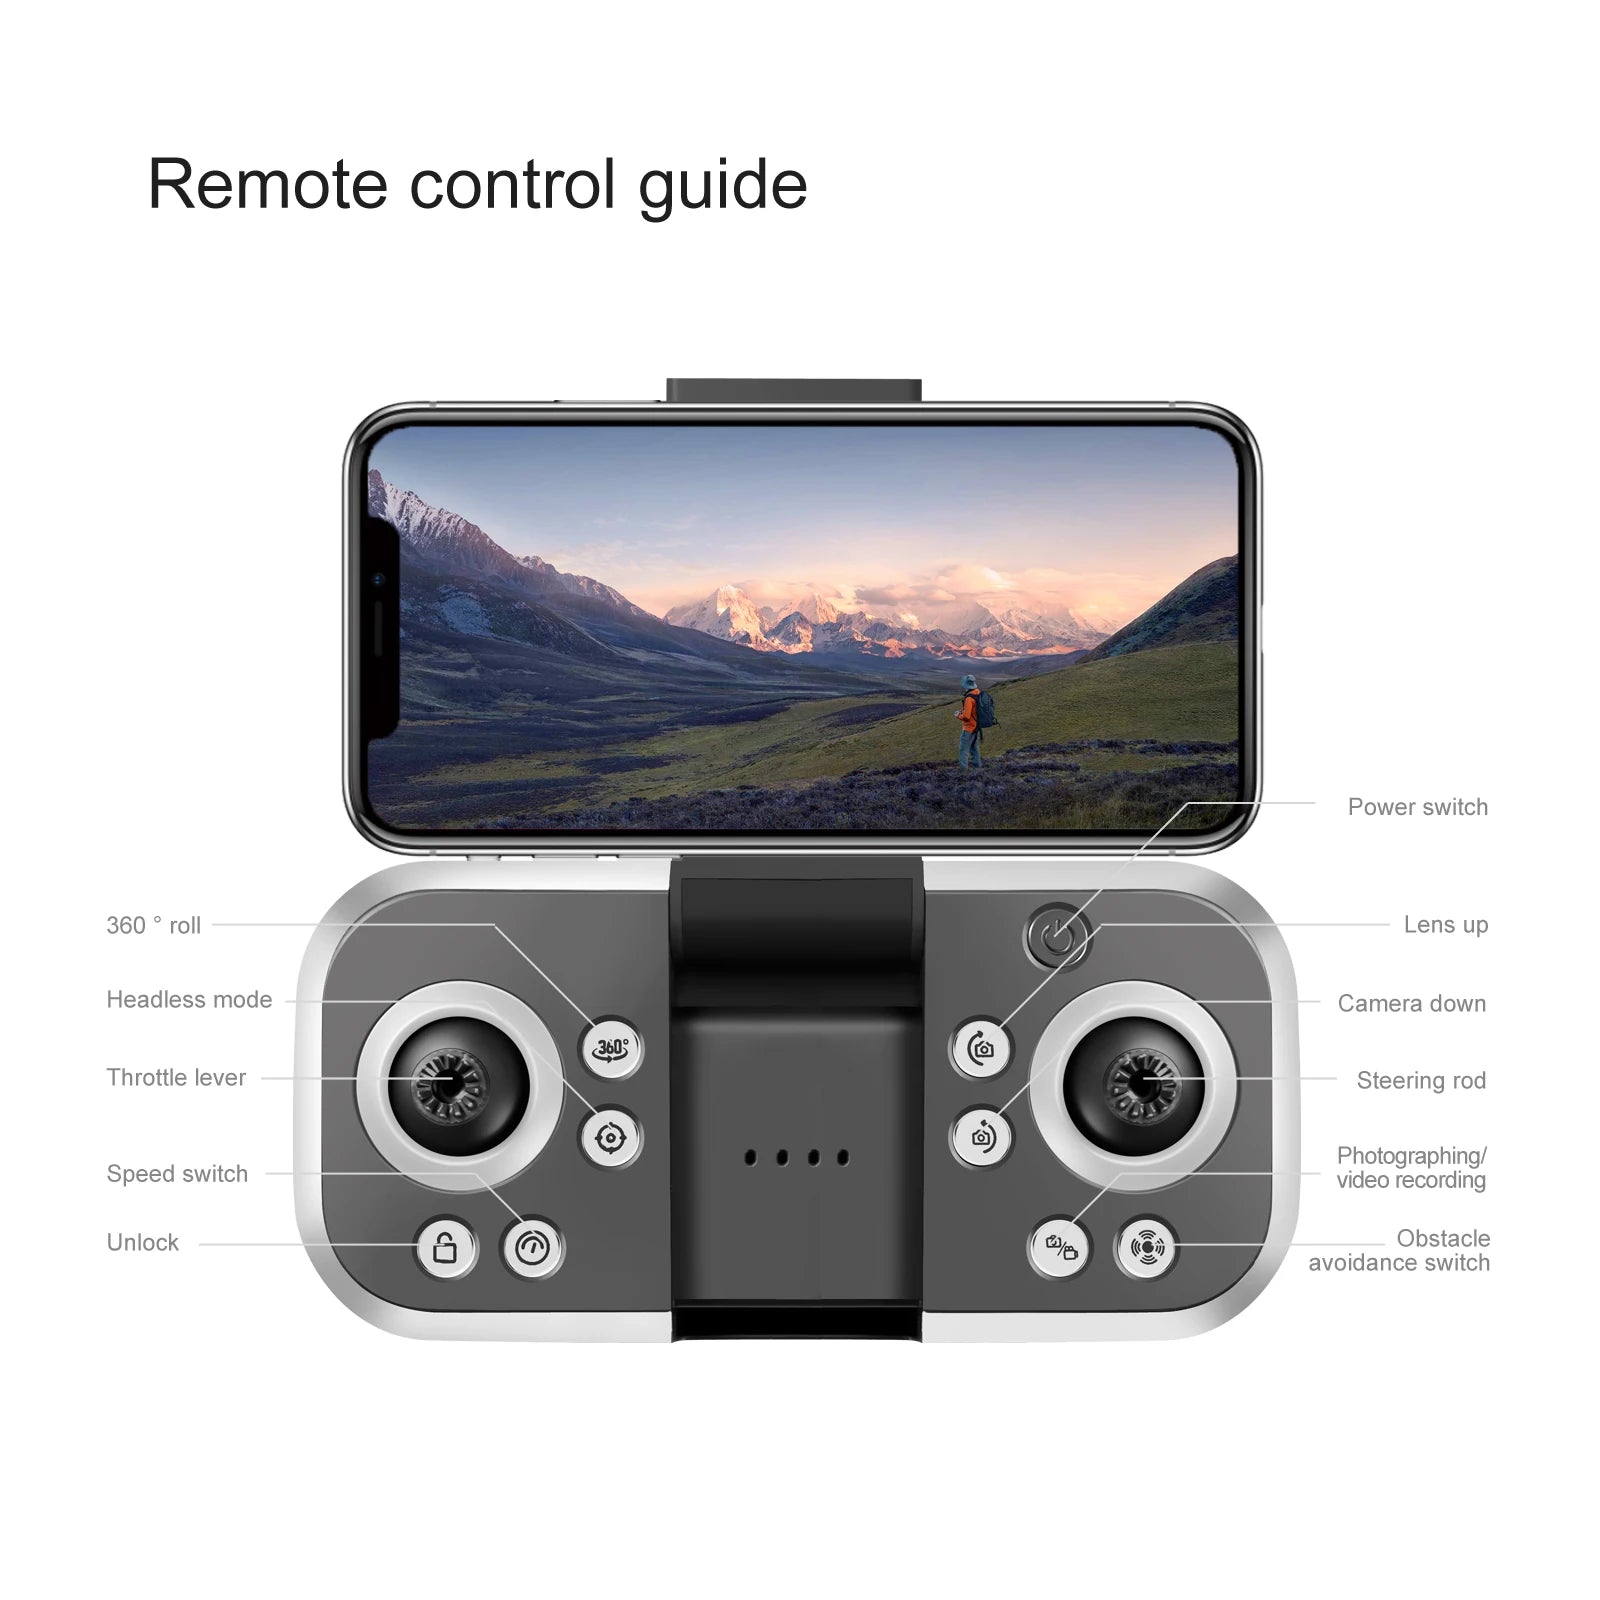 S138 Drone, remote control guide power switch 360 roll up headless mode camera down 26